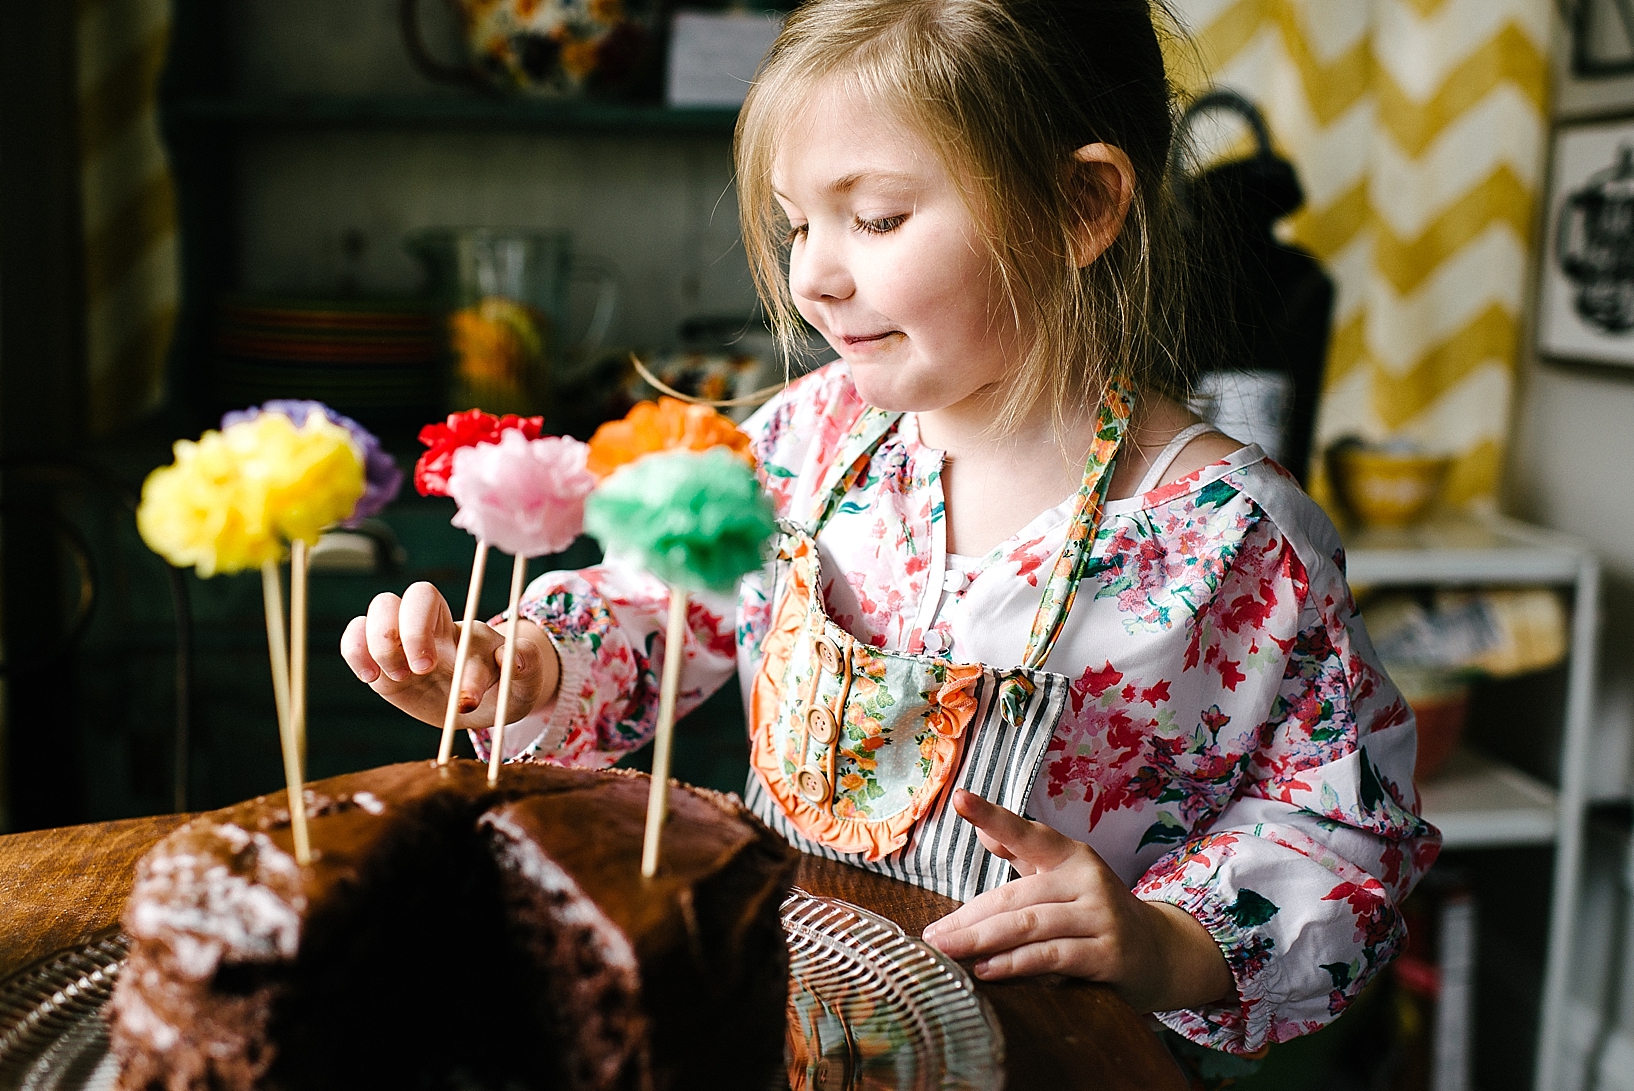 young girl sticking finger in icing on chocolate cake